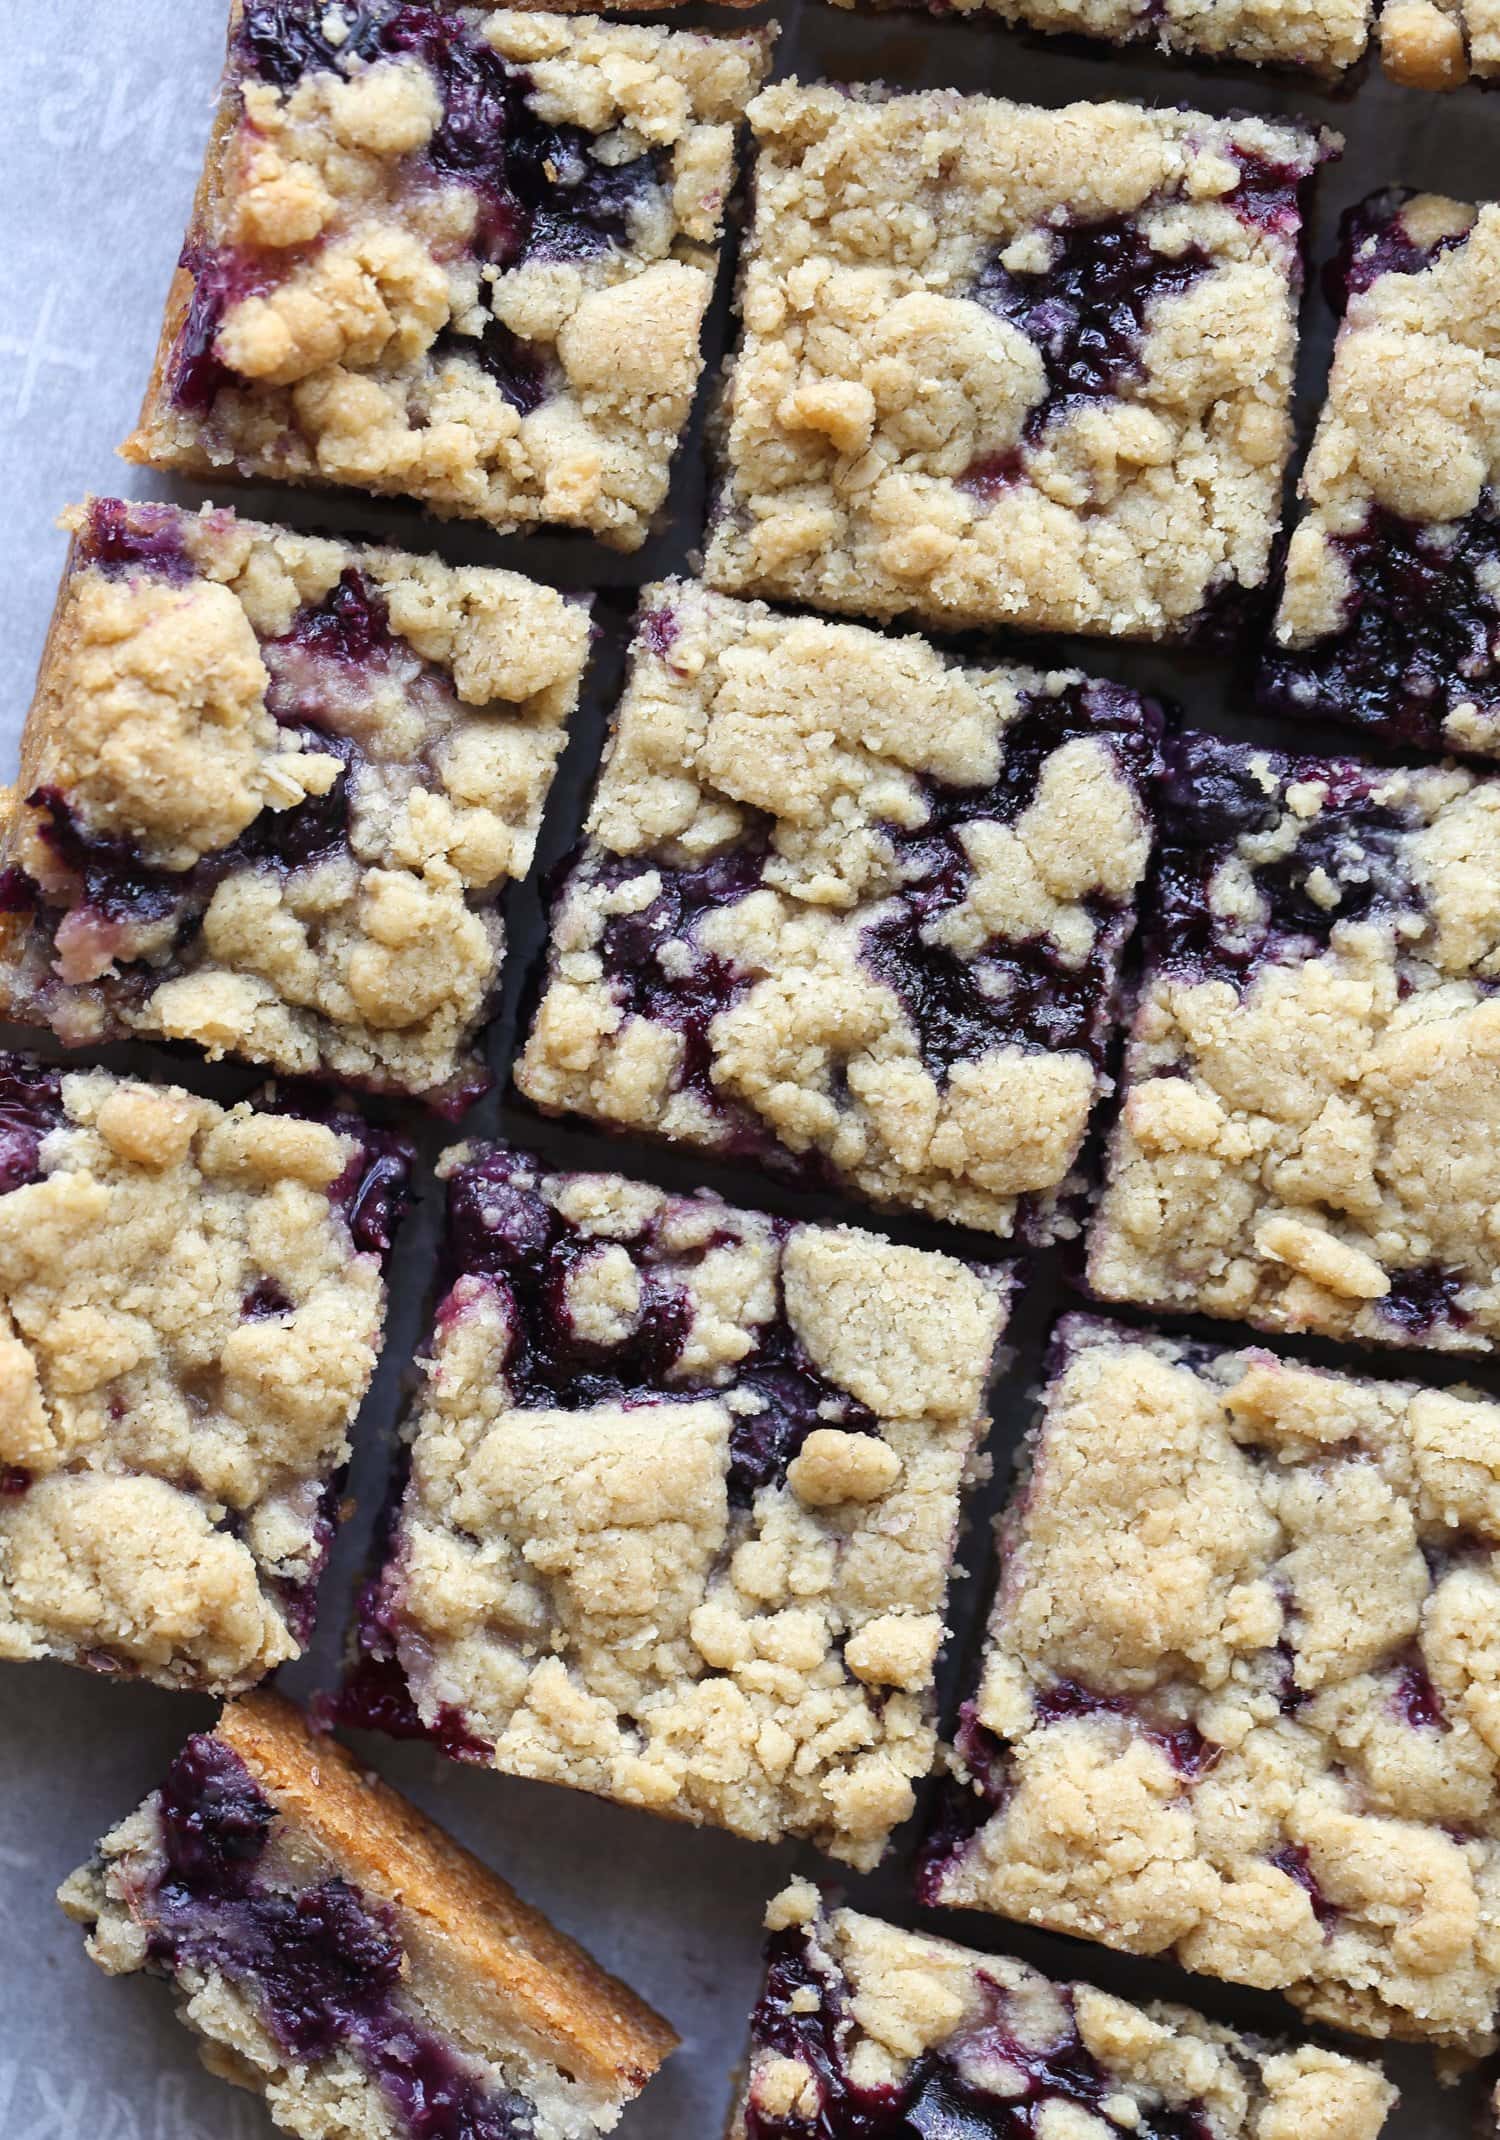 Cut the blueberry crumble bars into squares from above